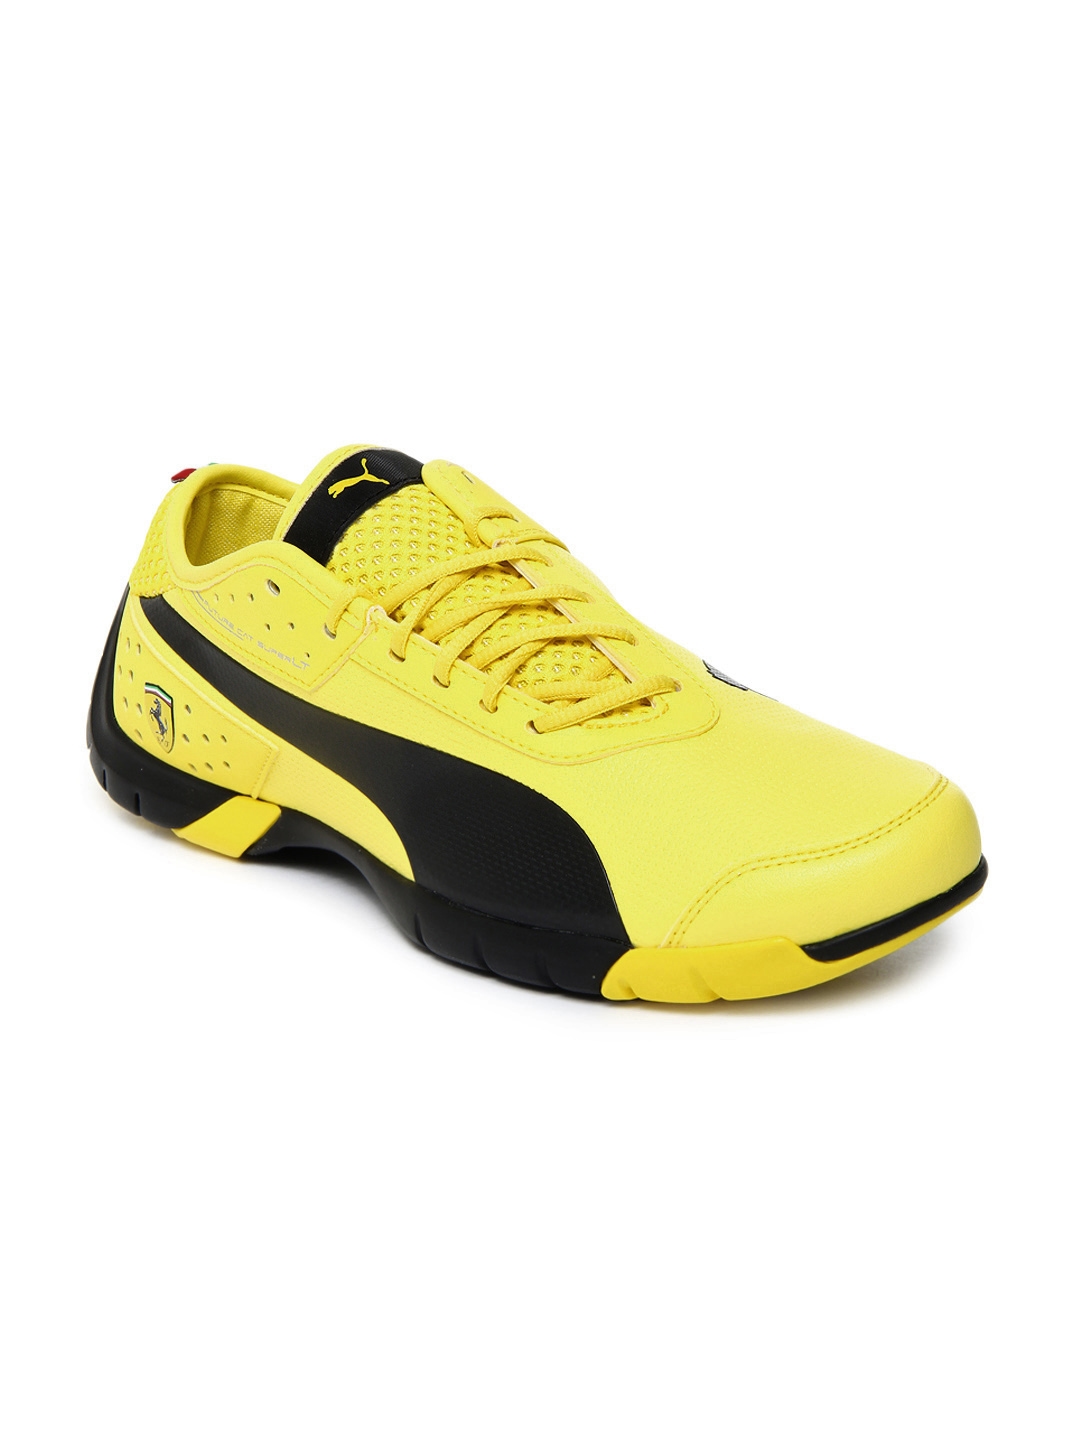 puma yellow sneakers on sale > OFF63 Discounts